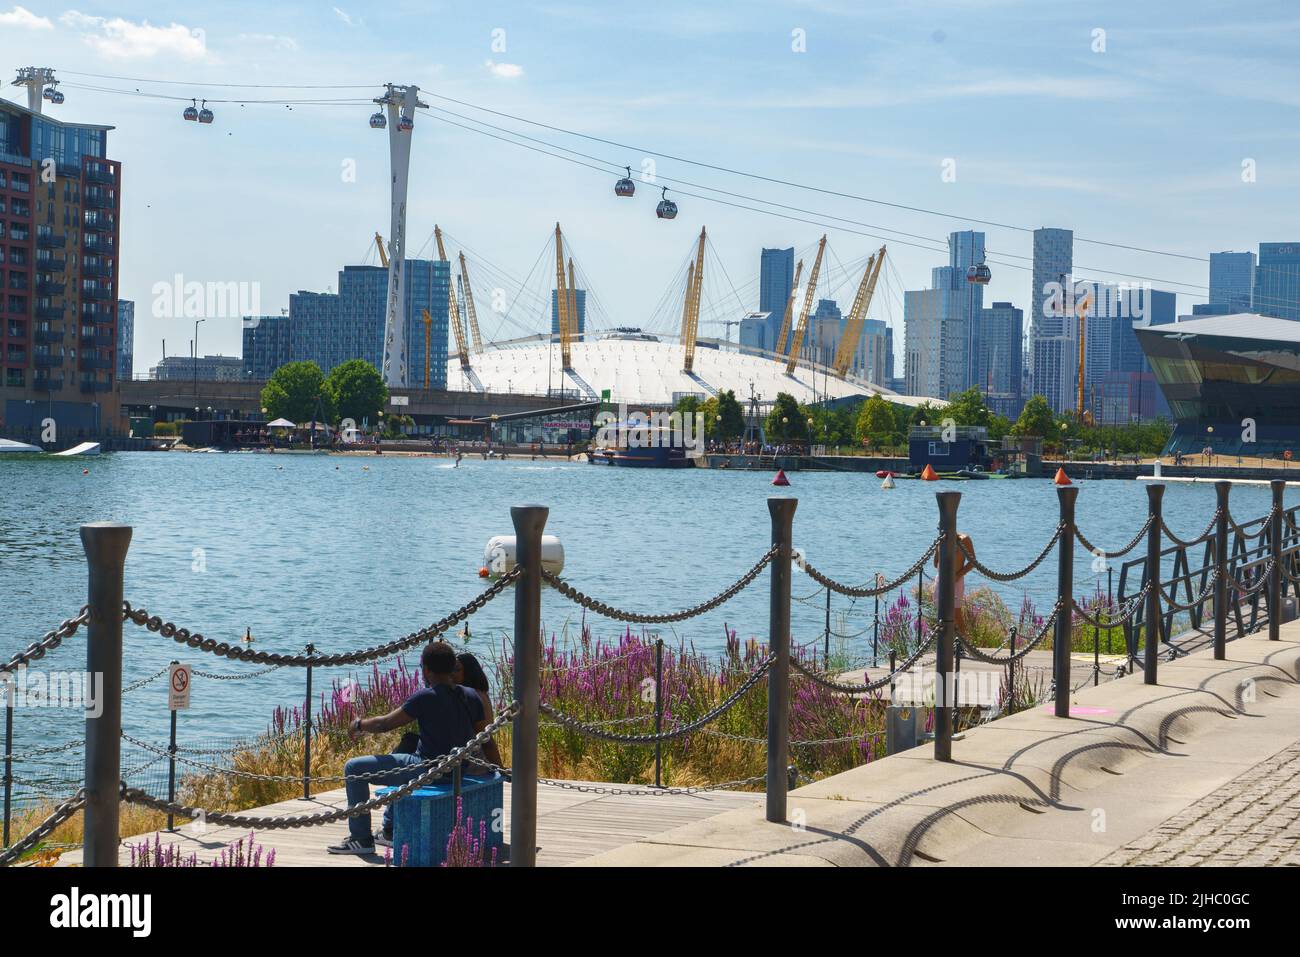 View of the Millennium Dome and the Emirates Cable Car, from the Royal Victoria Dock, London, UK Stock Photo